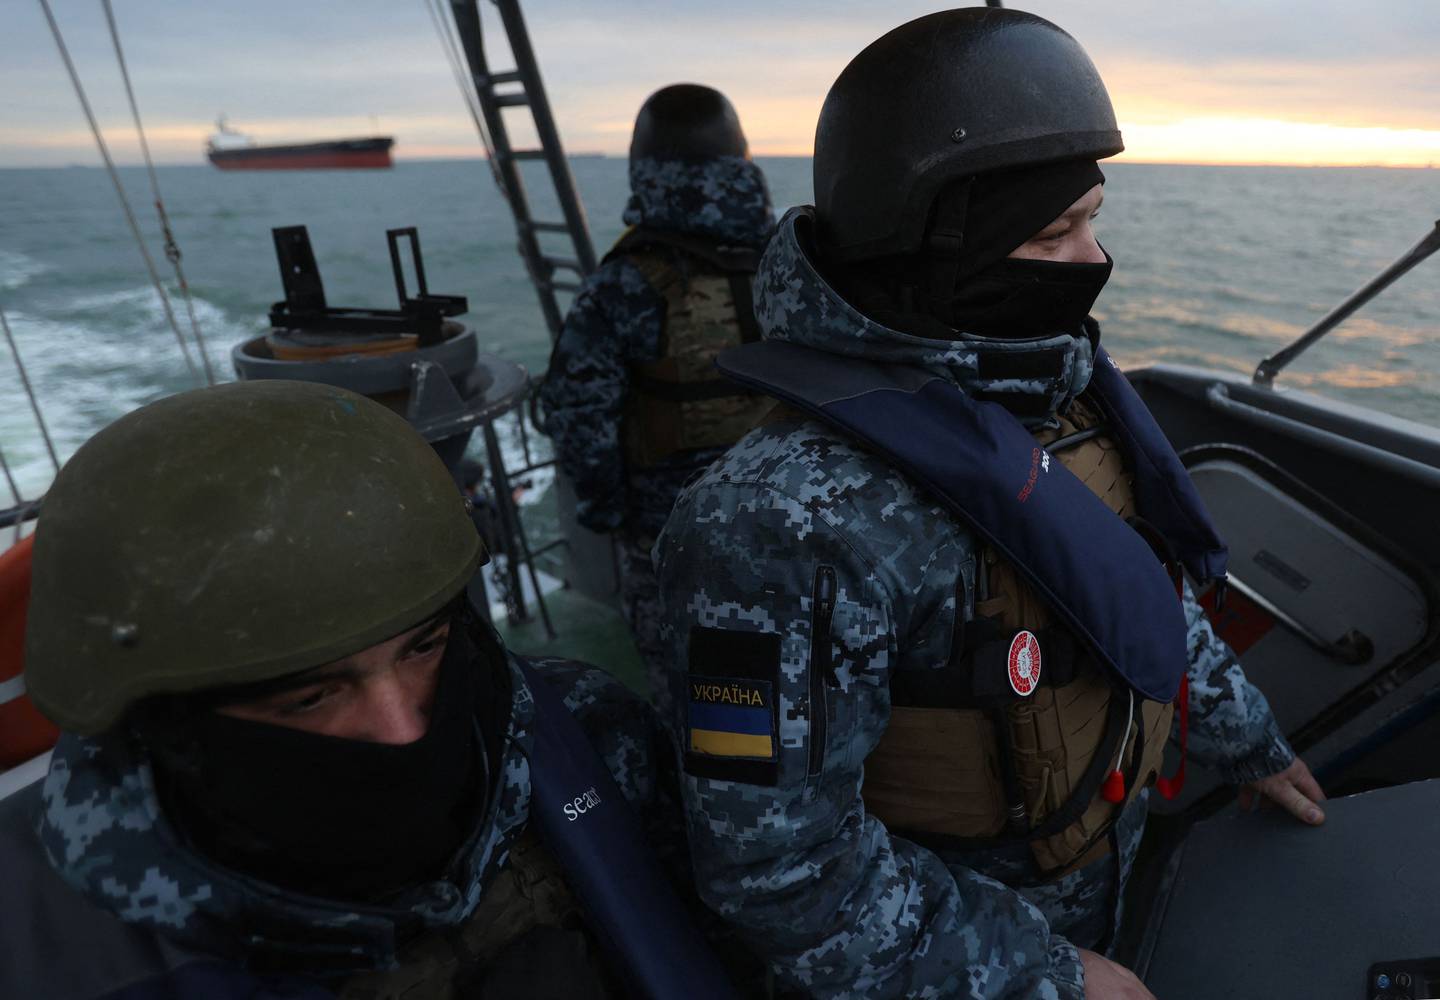 Servicemen of the Maritime Guard of the State Border Service of Ukraine look towards a cargo ship during an inspection for prohibited items and substances in the territorial waters of Ukraine on 18 December 2023, amid the Russian invasion in Ukraine. This patrol is part of Kyiv's strategy aimed at keeping the Russian military fleet away from the Ukrainian coast, with the key mission of securing the corridor set up since August between Ukrainian ports in the Odessa region and the Bosphorus Strait, after Moscow slammed the door on an international grain agreement. (Photo by Anatolii Stepanov / AFP)